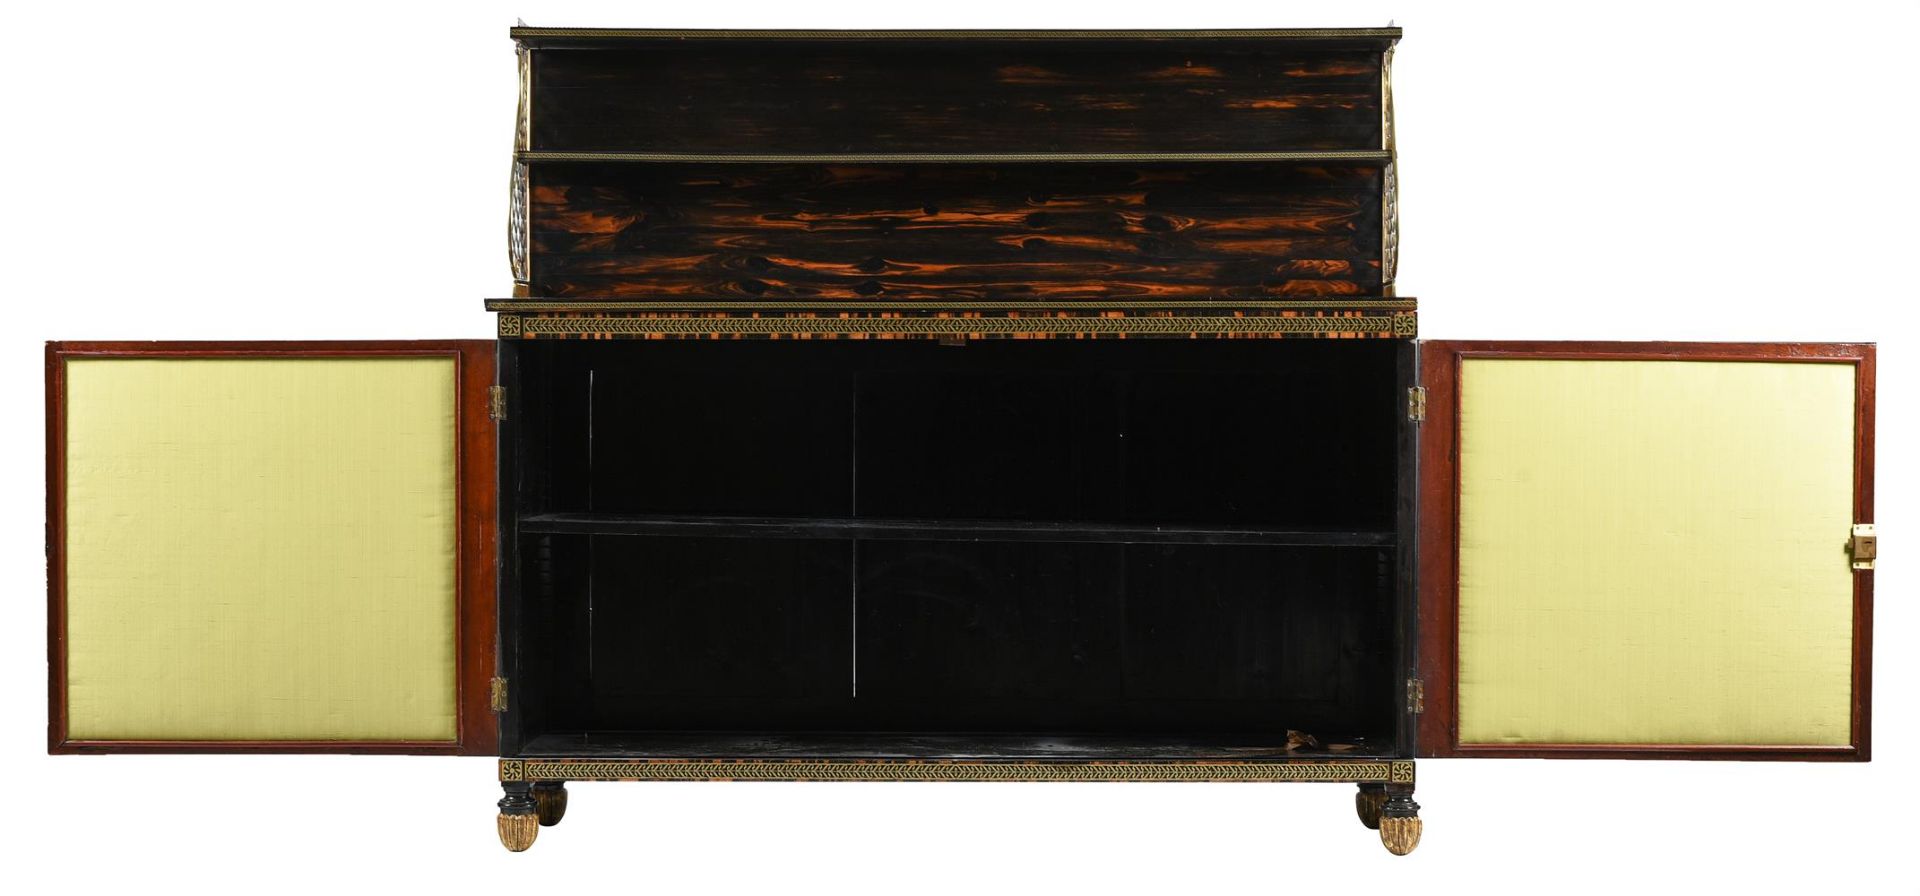 A REGENCY CALAMANDER, BRASS MARQUETRY AND GILT BRONZE MOUNTED SIDE CABINET, CIRCA 1815 - Image 6 of 6